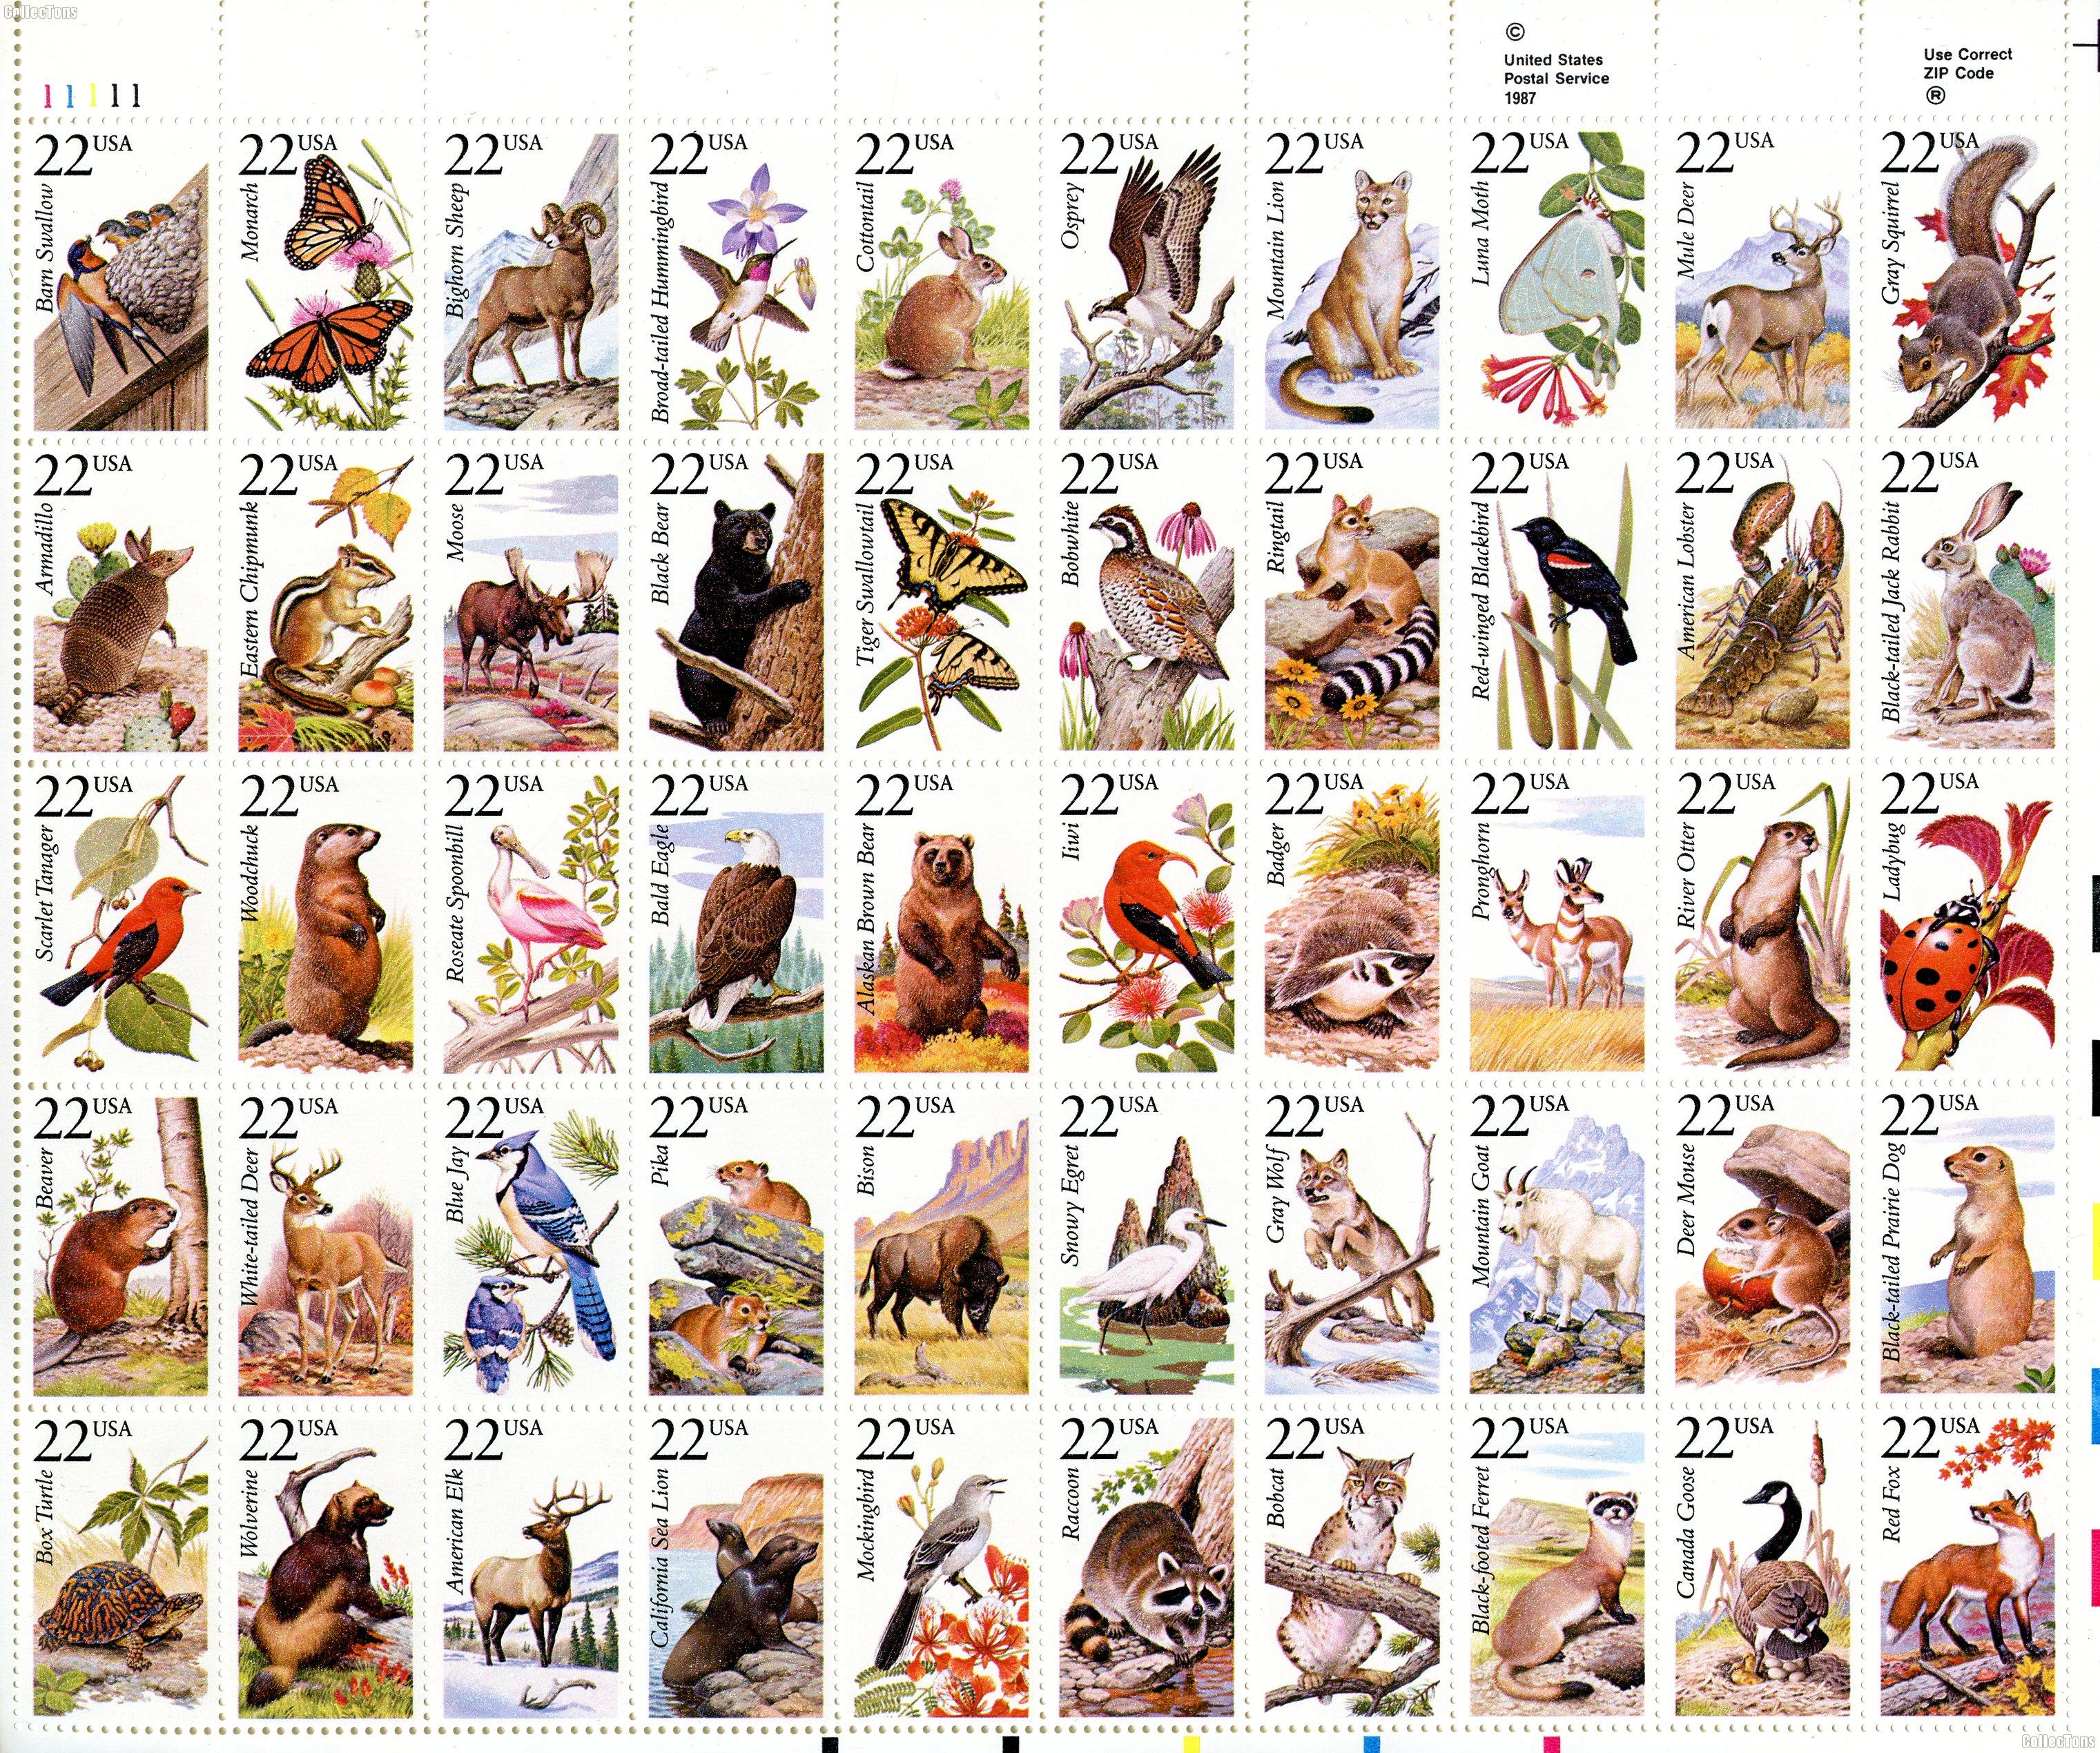 1987 American Wildlife 22 Cent US Postage Stamp MNH Sheet of 50 Scott #2286-2335a